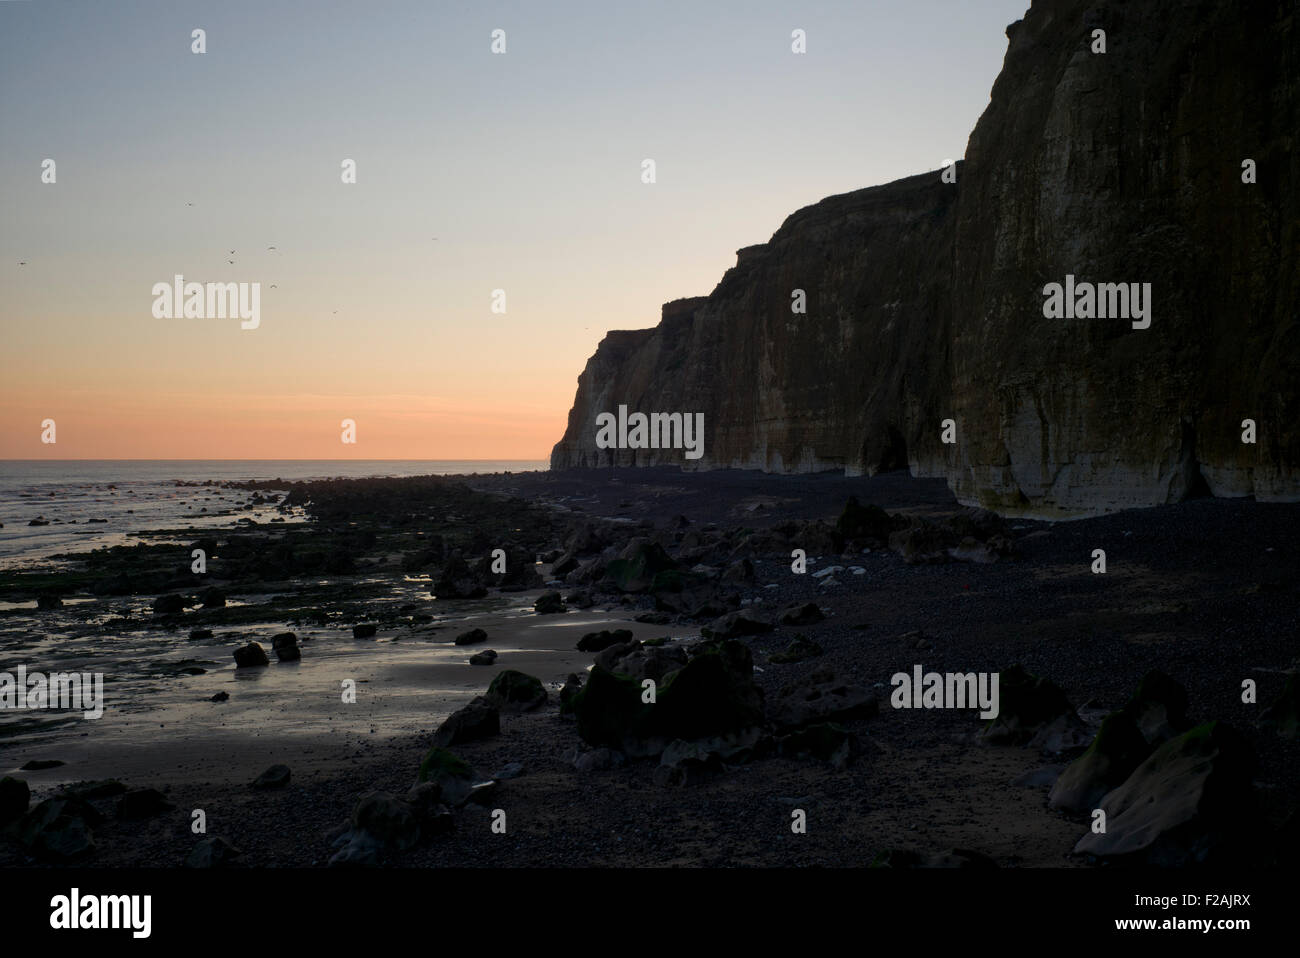 Sunrise behind cliffs, beach and sea, Normandy, France Stock Photo